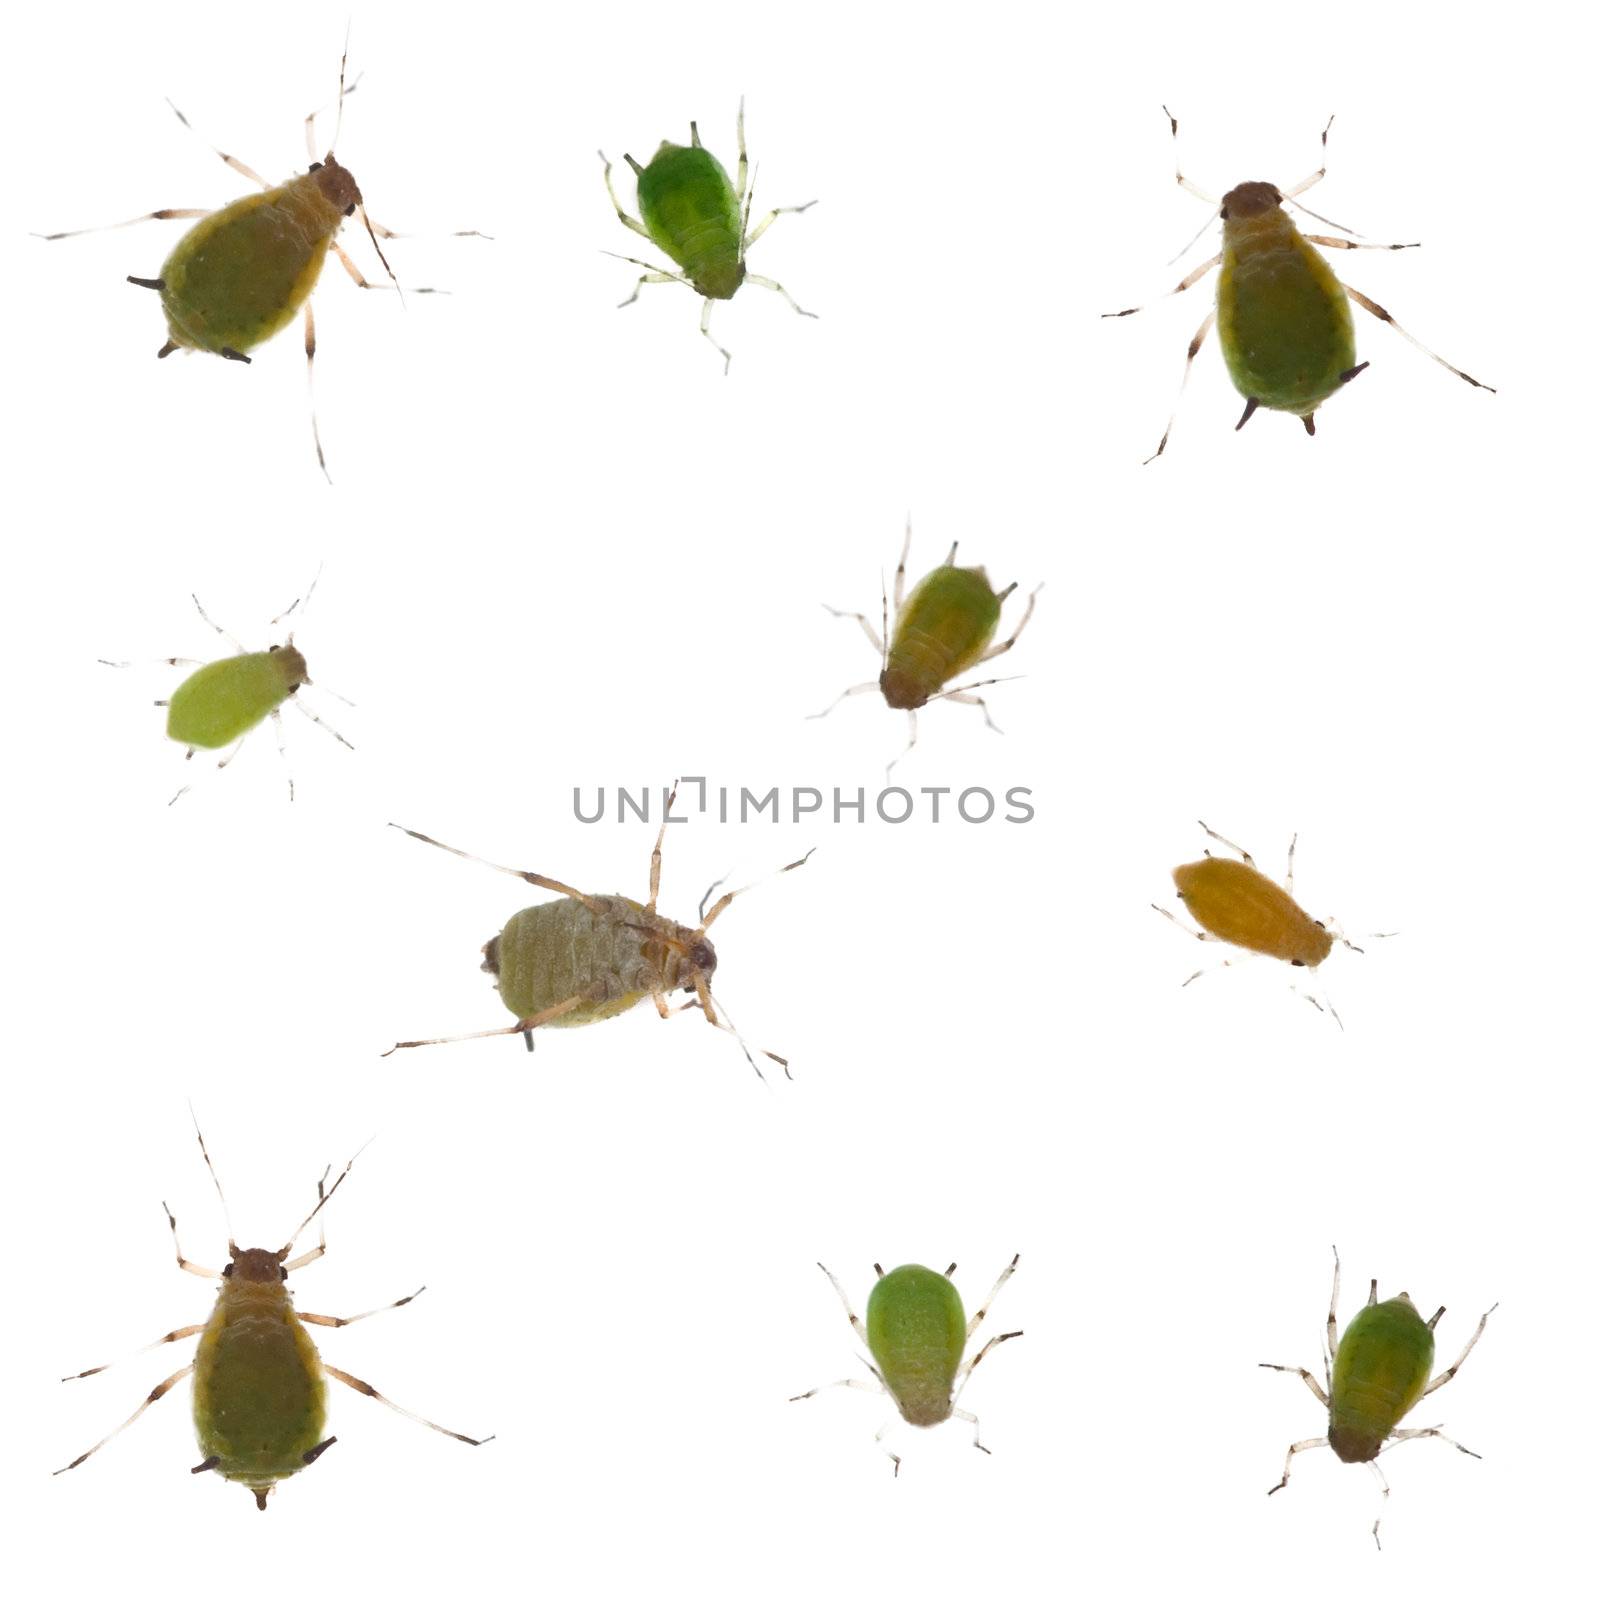 Group of green aphids on white background by pzaxe